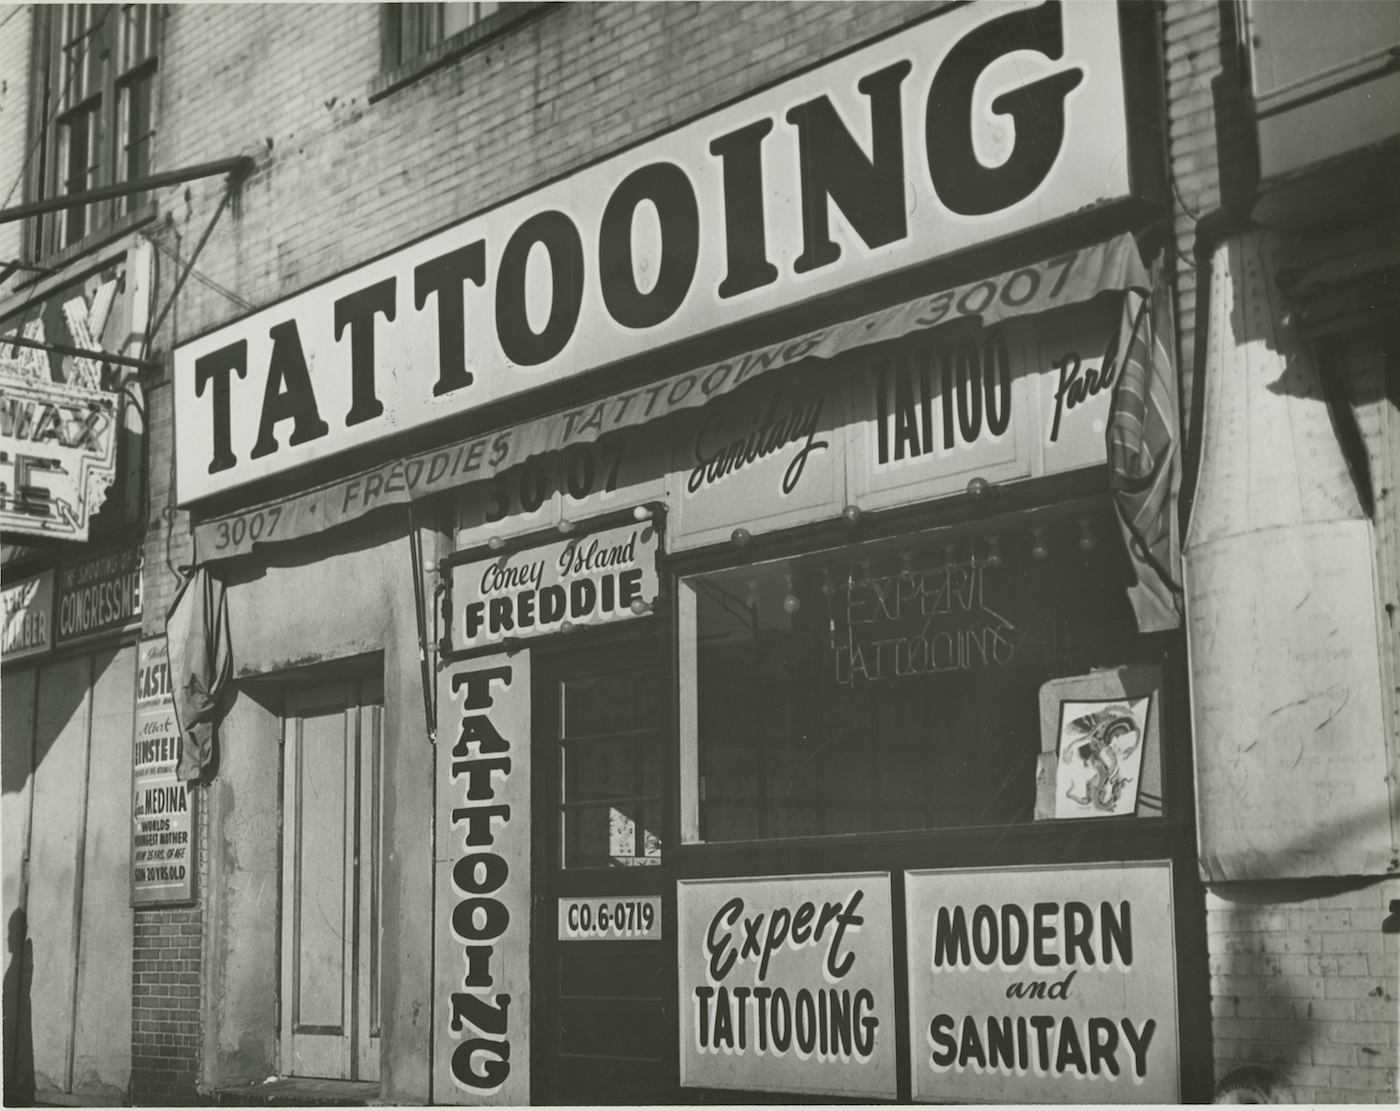  Irving Herzberg, “Tattoo shop of ‘Coney Island Freddie’ just prior to New York City’s ban on tattooing” (1961), digital print (courtesy Brooklyn Public Library)    